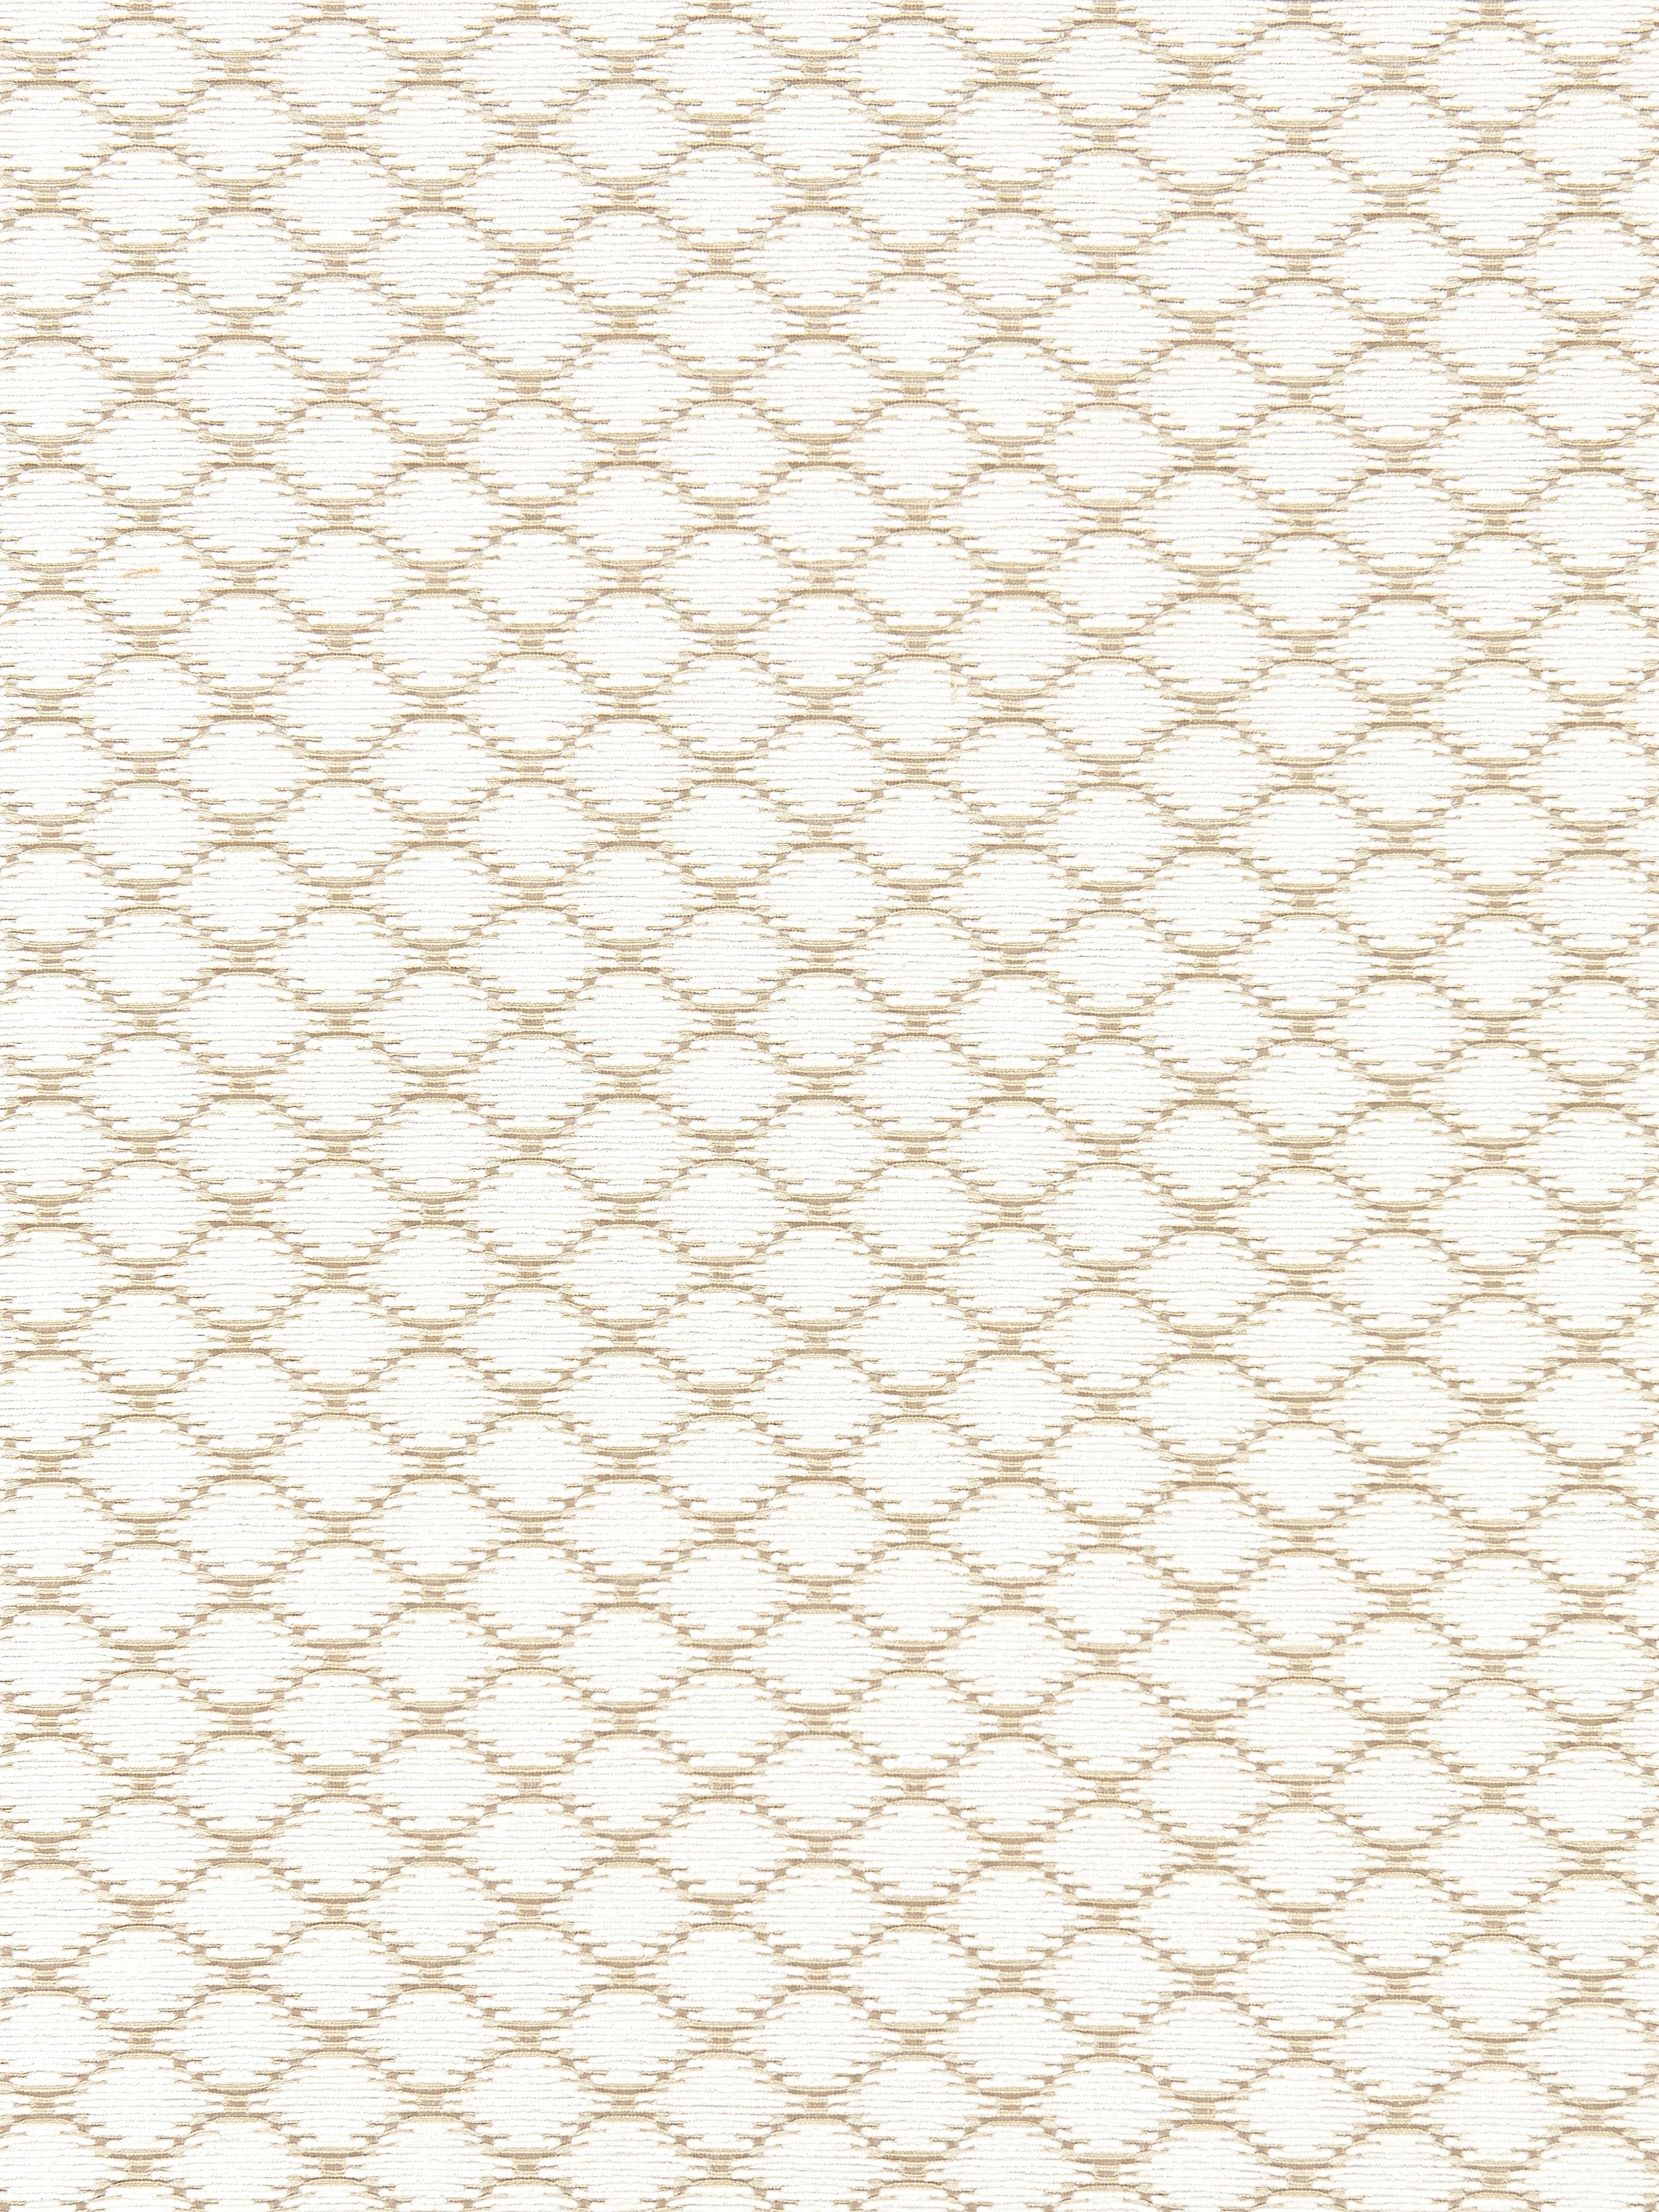 Tristan Weave fabric in white sand color - pattern number SC 000127101 - by Scalamandre in the Scalamandre Fabrics Book 1 collection